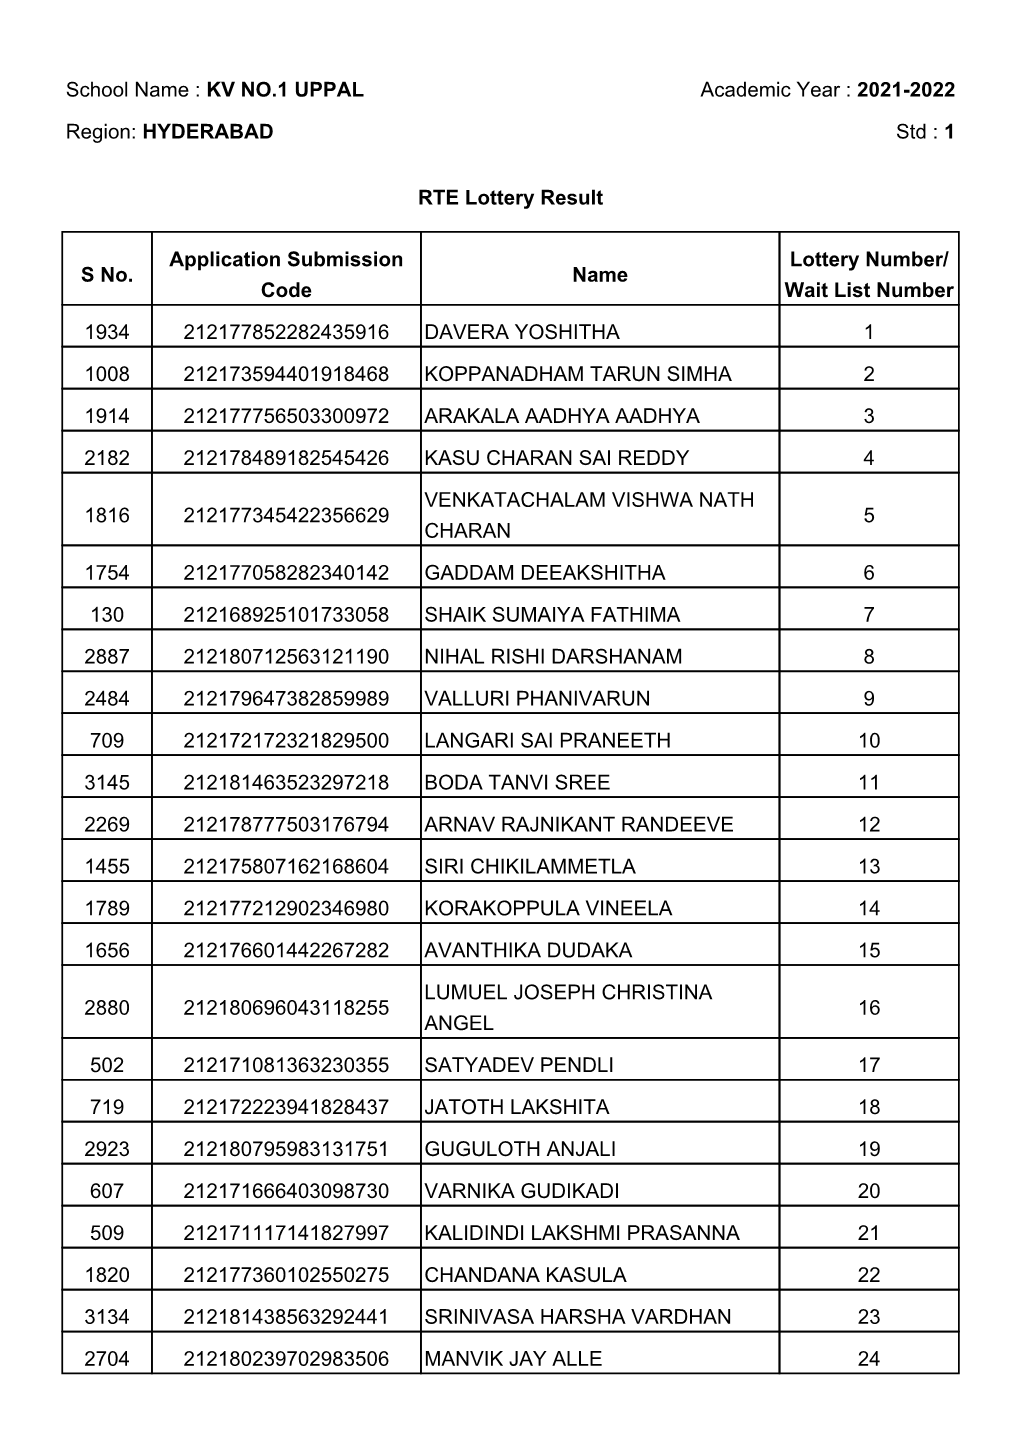 RTE Lottery Result School Name : KV NO.1 UPPAL Academic Year : 2021